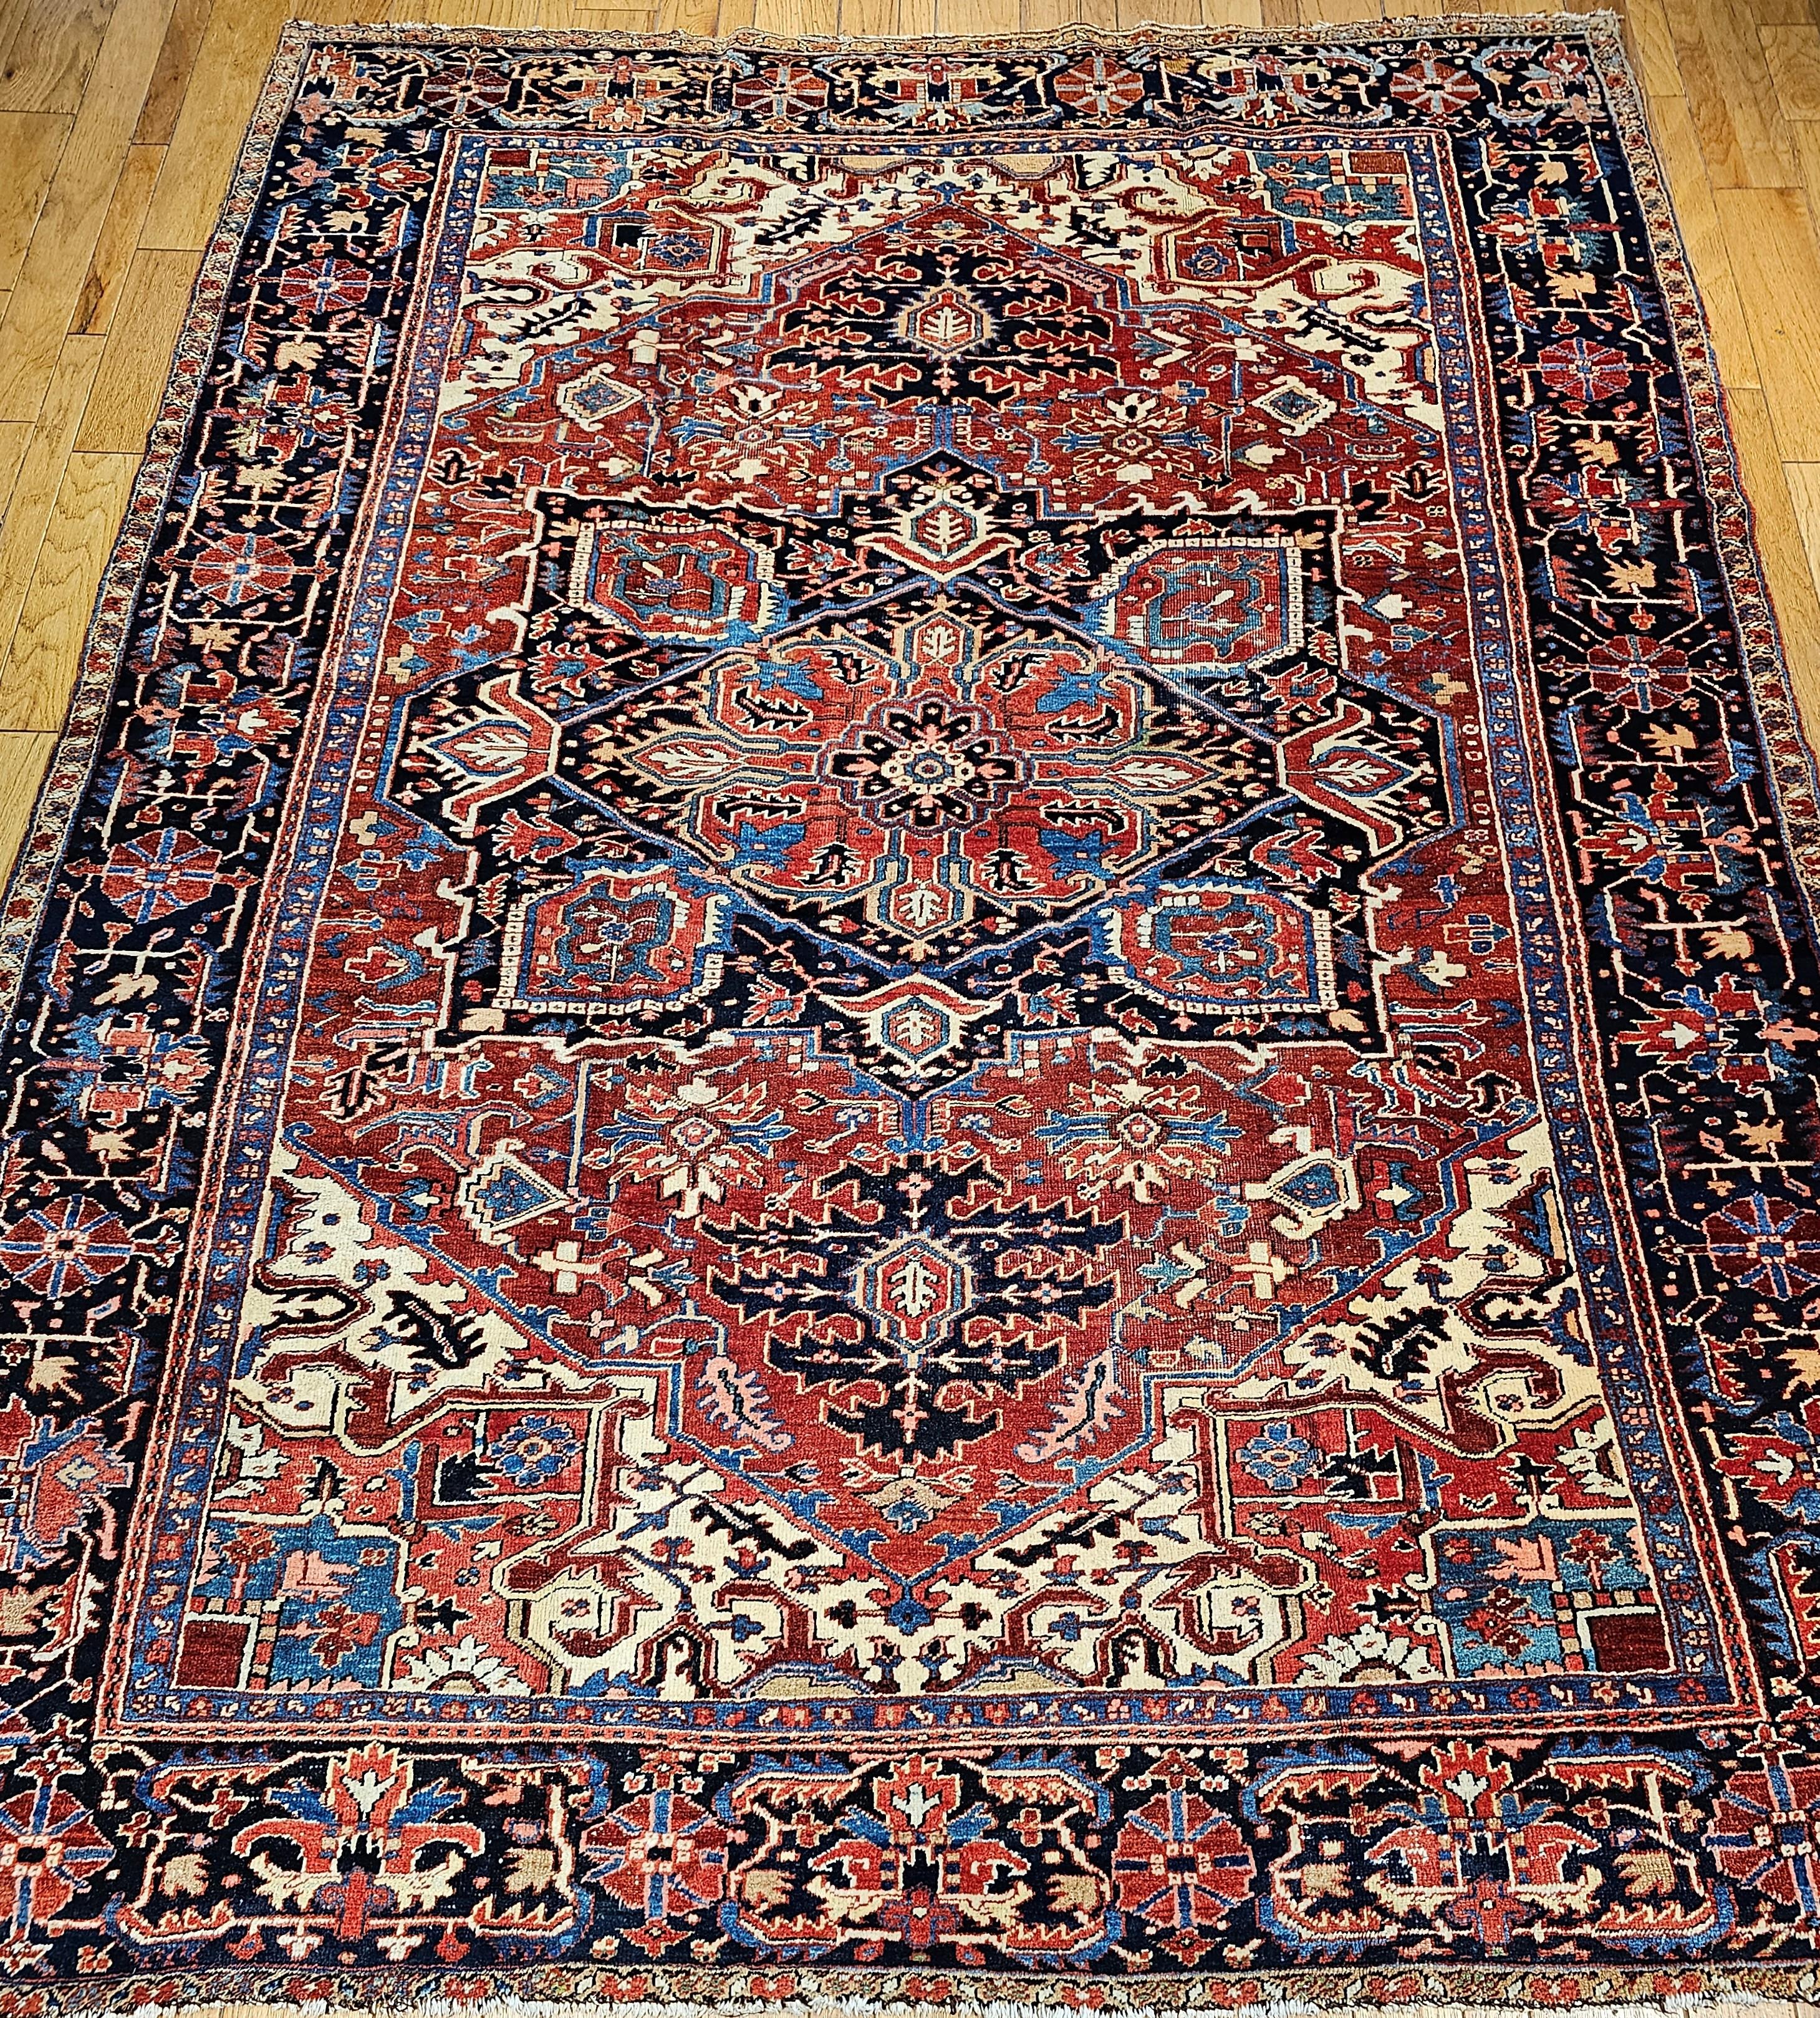  A wonderful example of village weaving from NW Persia is represented in this room-size Heriz Serapi rug from the late 1800s.  The rug has dark red field color with corner spandrels in beautiful French Blue and pink colors.  The central medallion